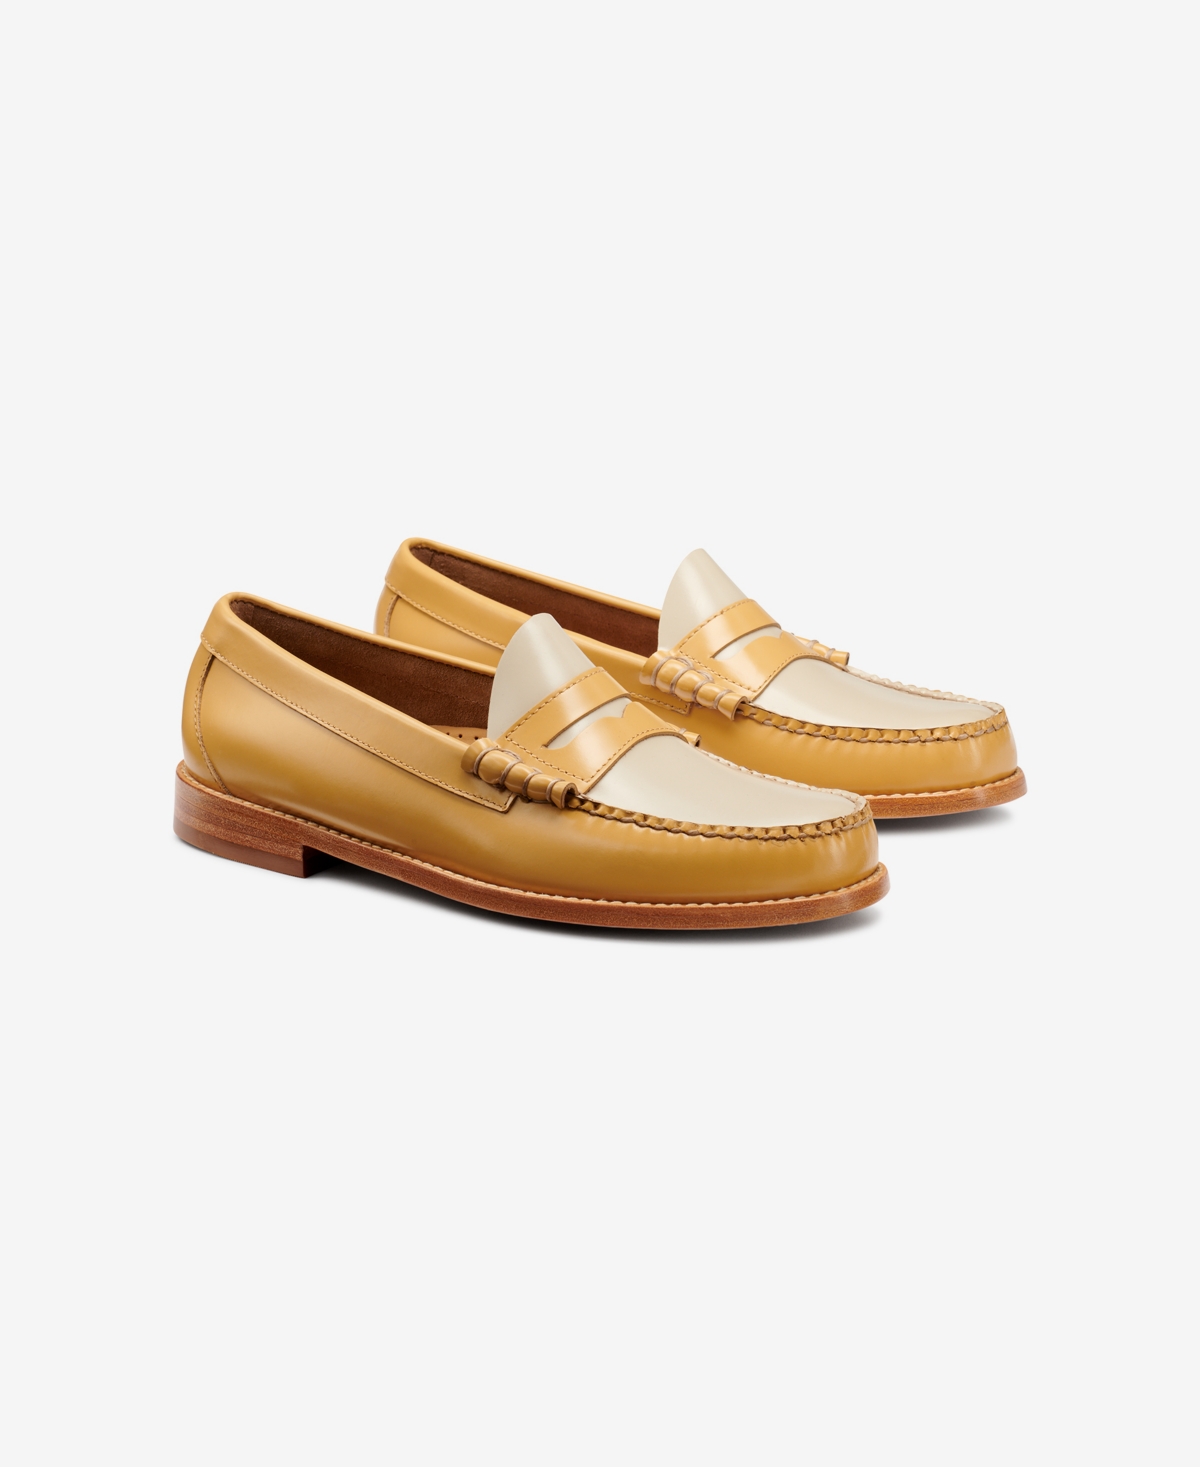 G.h.bass Men's Larson Color Block Weejuns Penny Loafers - Curry Multi